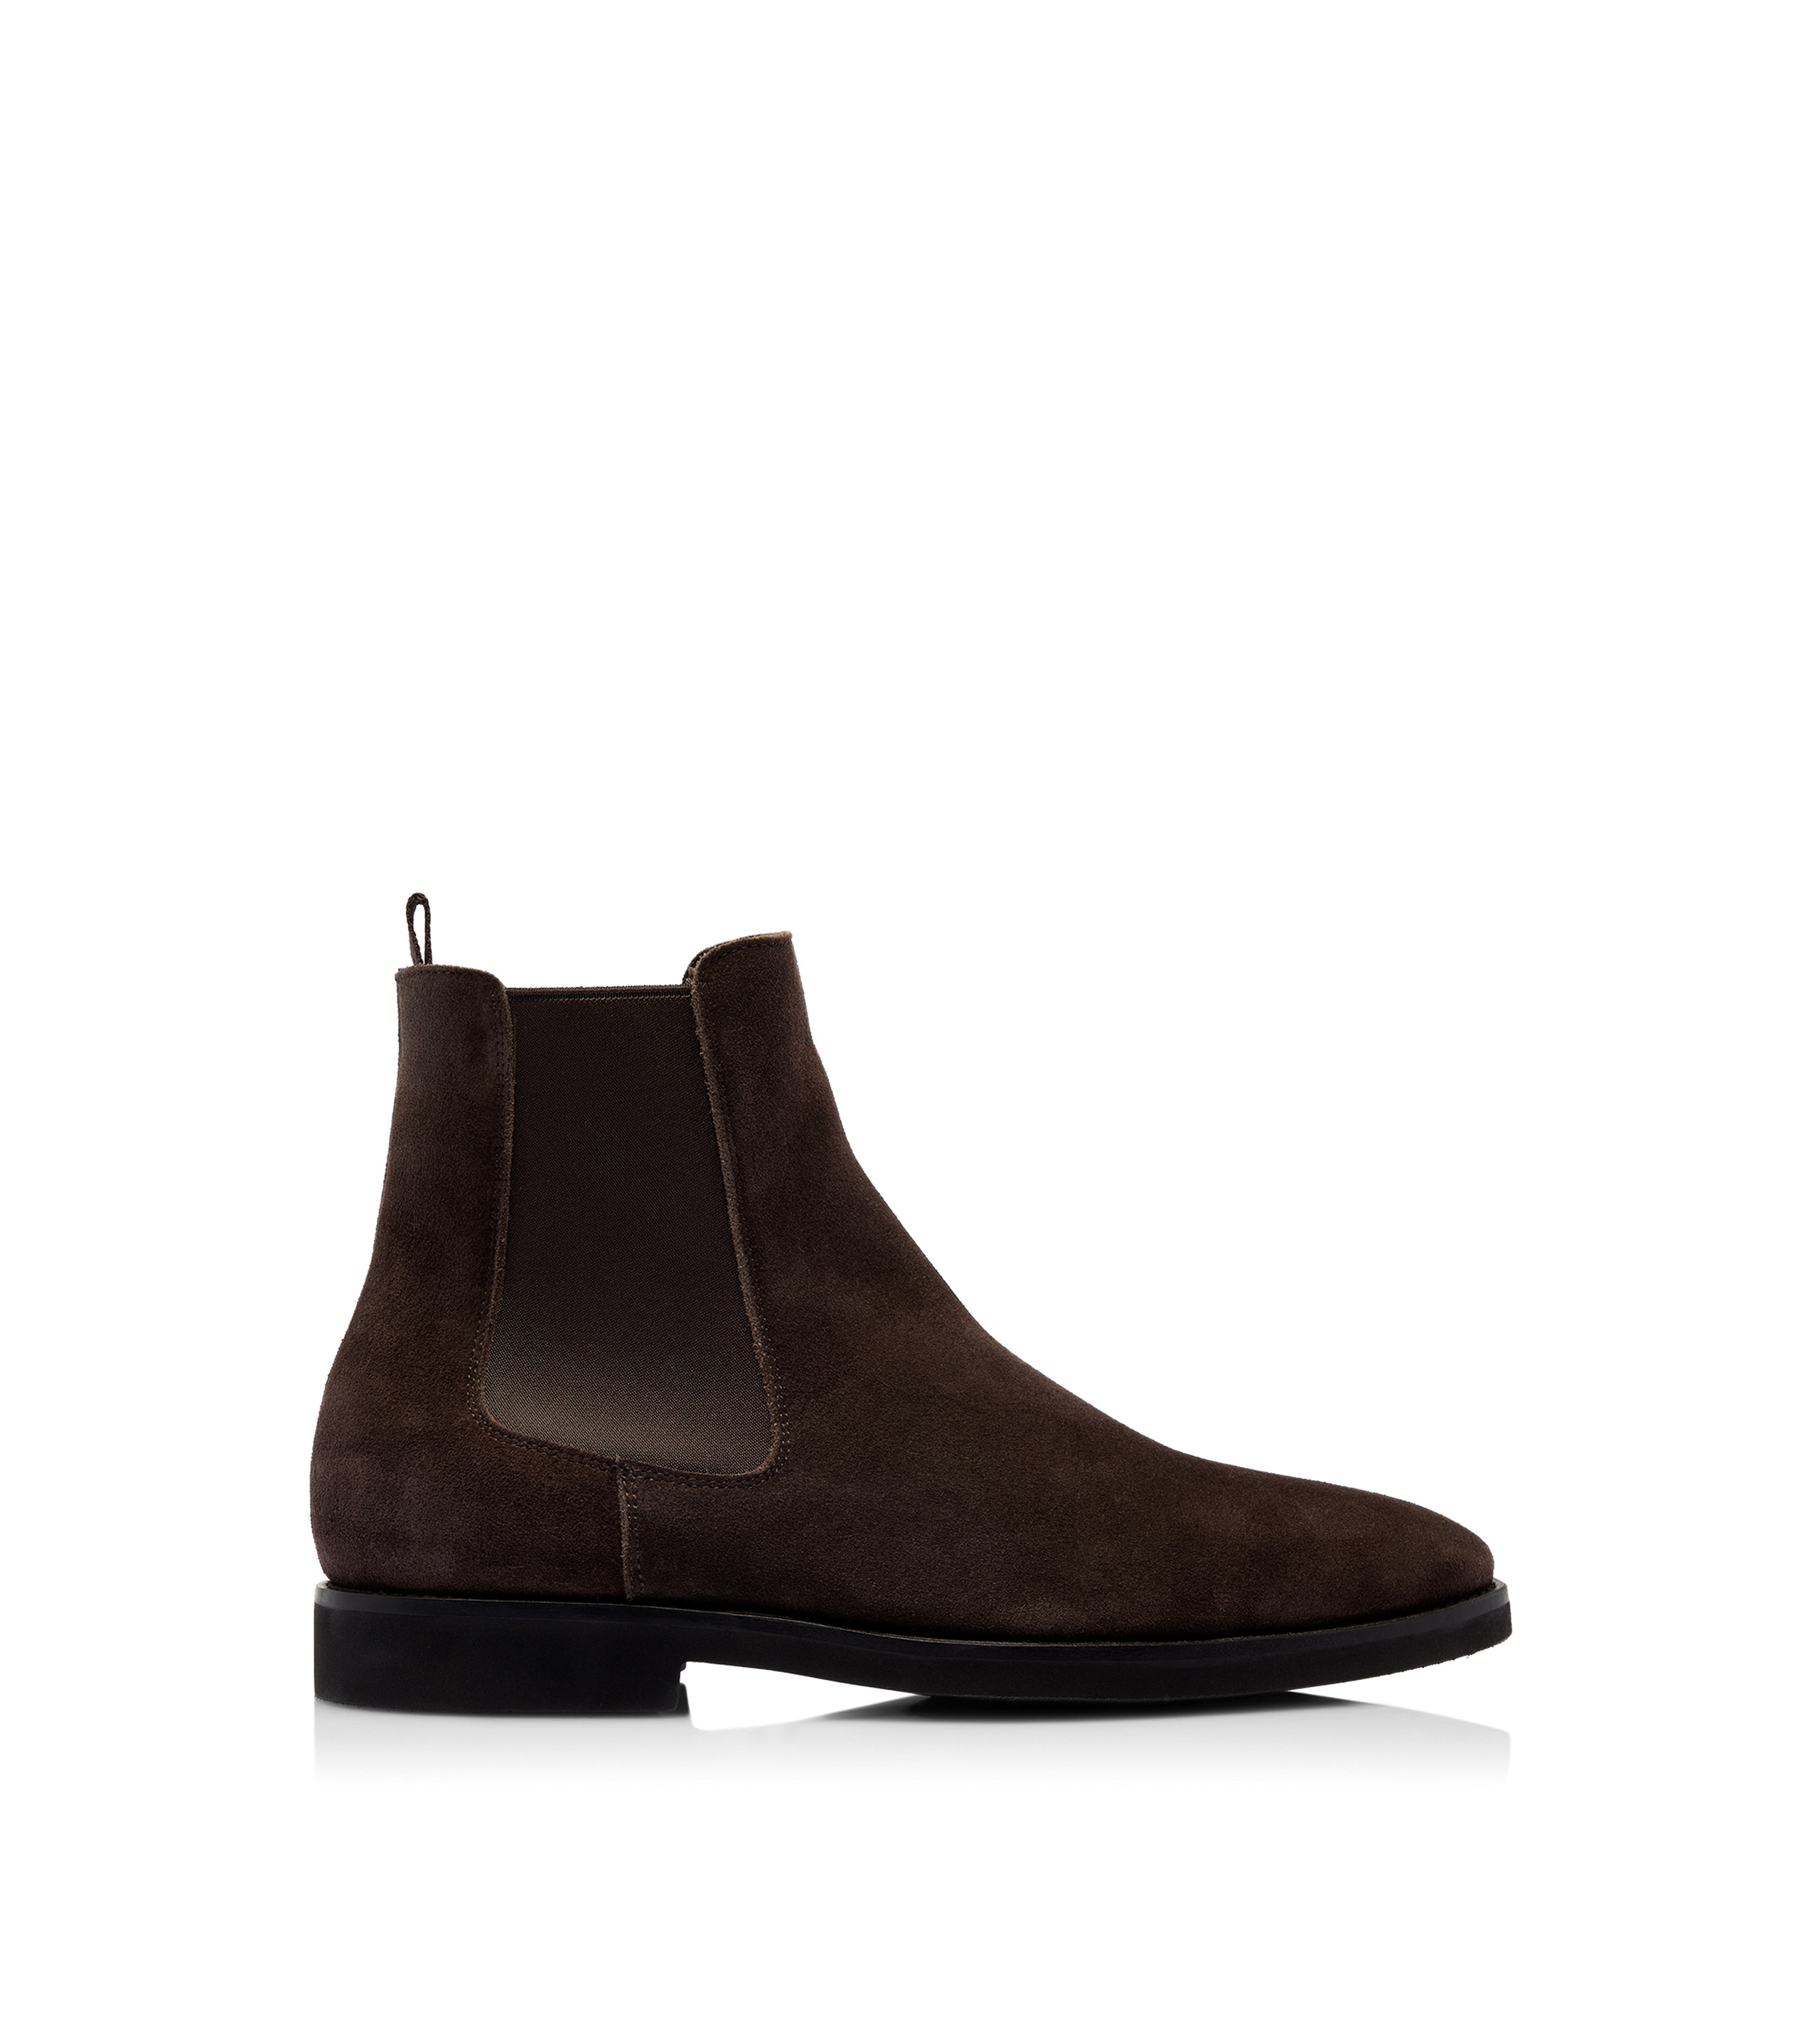 SUEDE LIGHT SOLE CHELSEA BOOT - 1